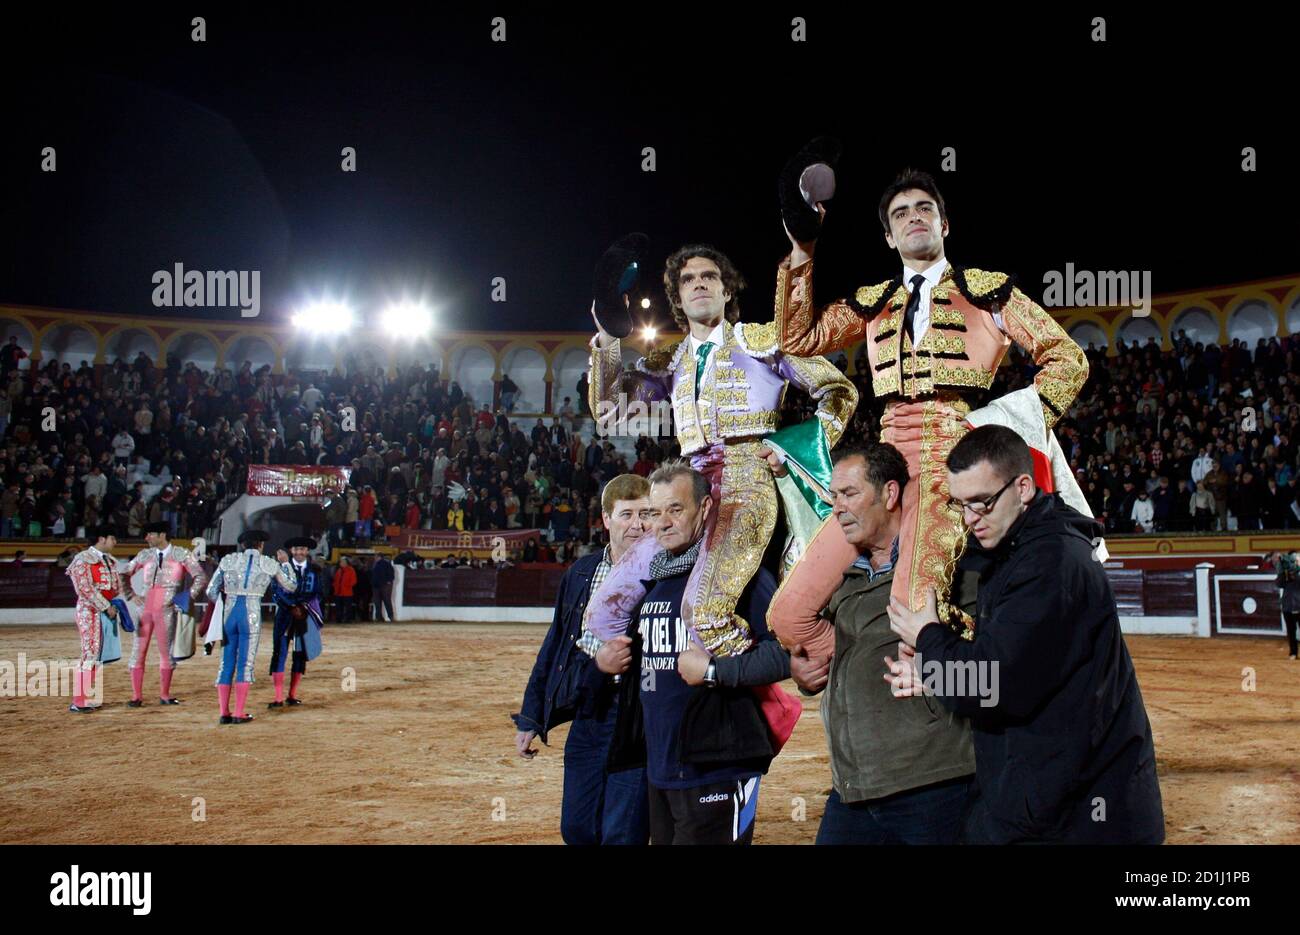 Spanish matadores Jose Tomas (C) and Miguel Angel Perera celebrate after  the end of a bullfight in Olivenza, near Badajoz March 6, 2010. Supporters  and opponents of bullfighting dueled in the Catalan